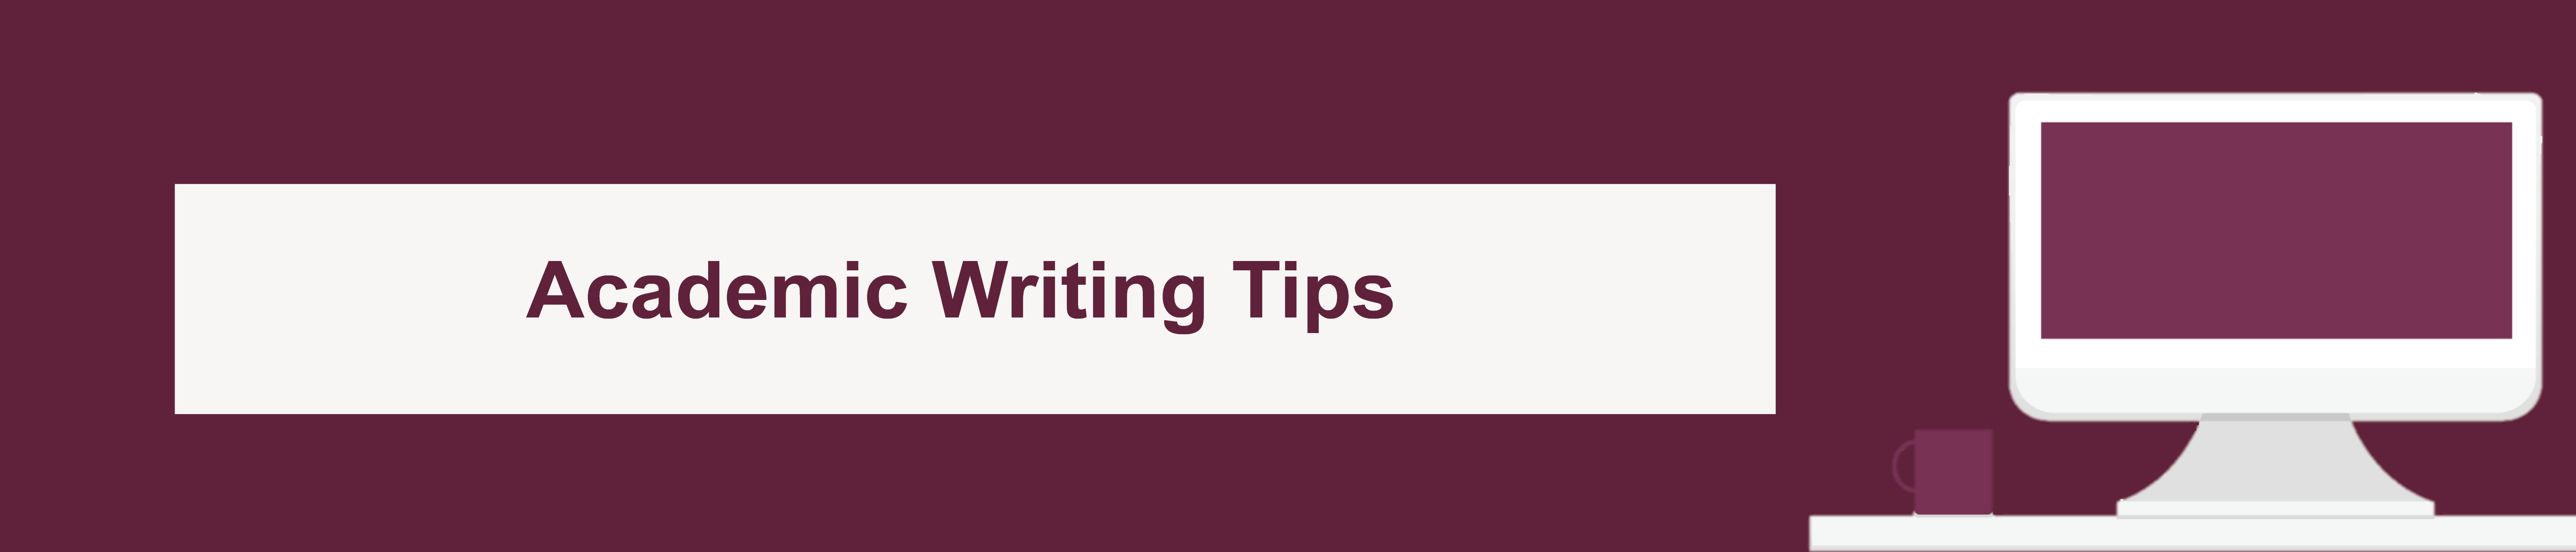 Banner for academic writing tips resources page.png